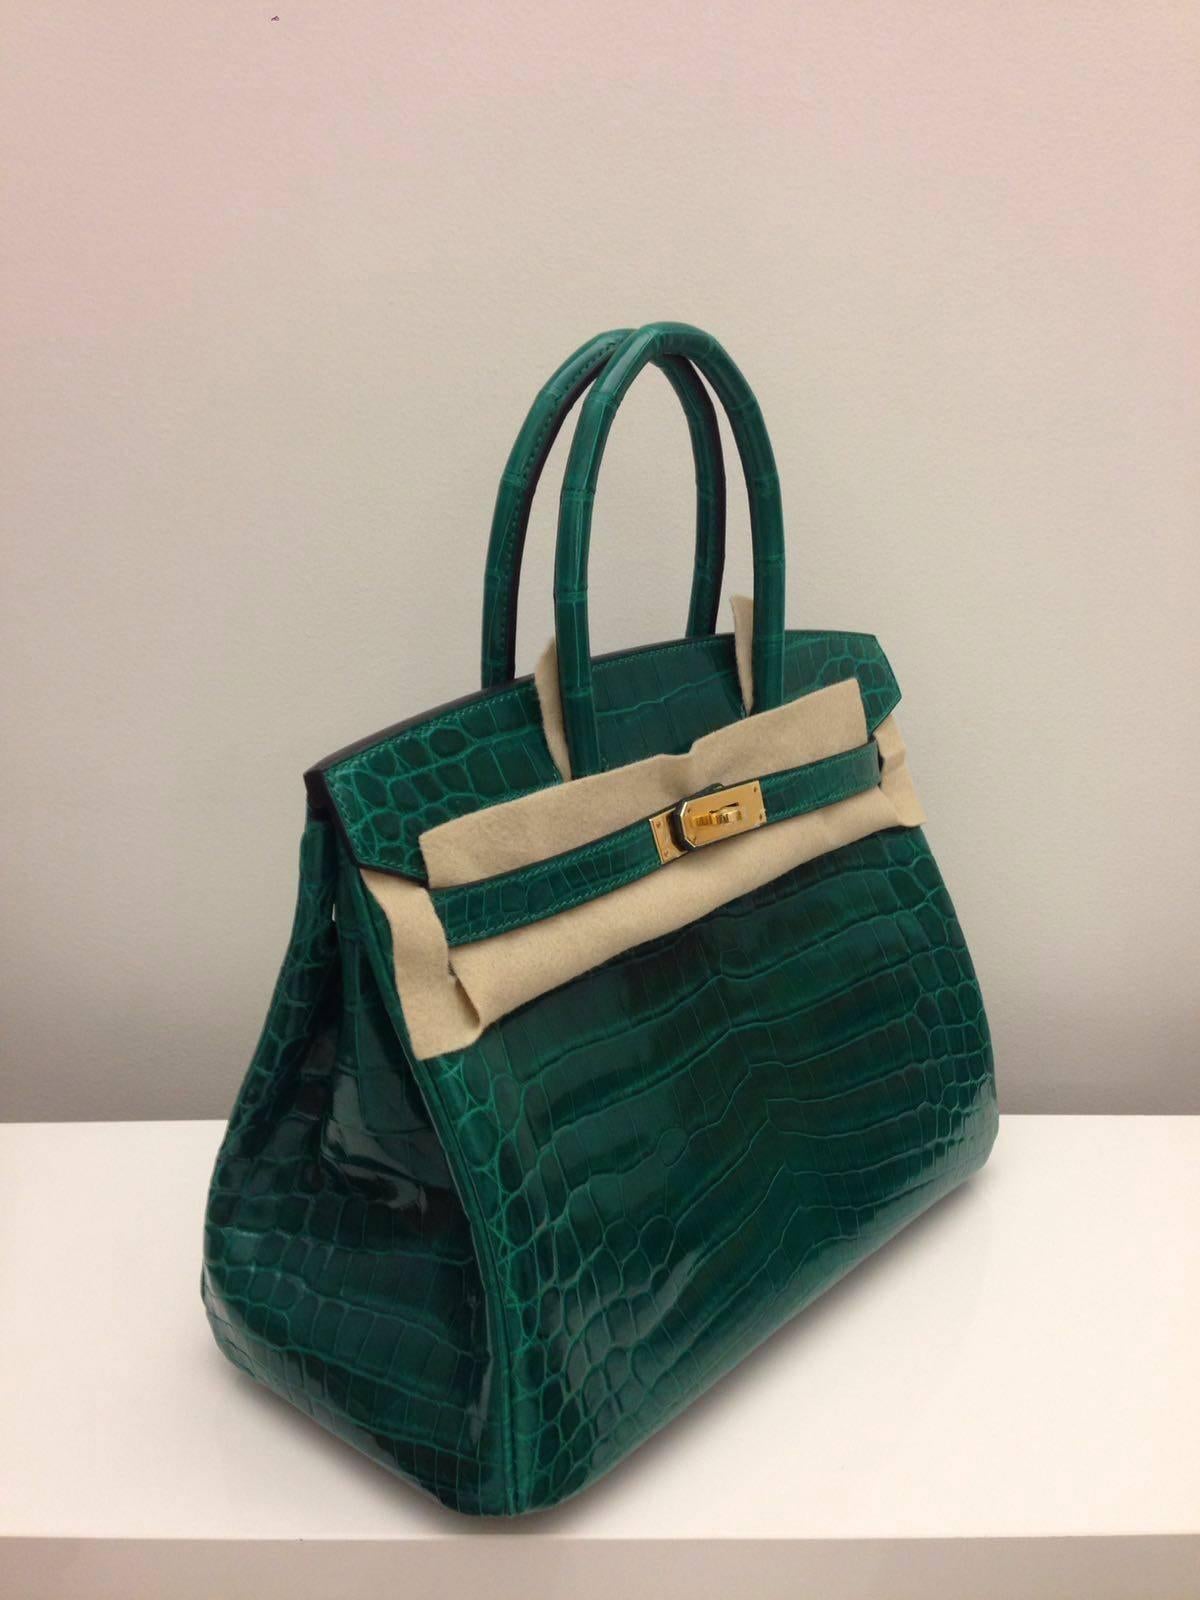 Hermes 
Birkin size 30 
Crocodile Niloticus leather 
Colour Green Emerald 
gold hardware 
store fresh, comes with receipt and full set (dust bag, box...) 
Hydeparkfashion specializes in sourcing and delivering authentic luxury handbags, mainly